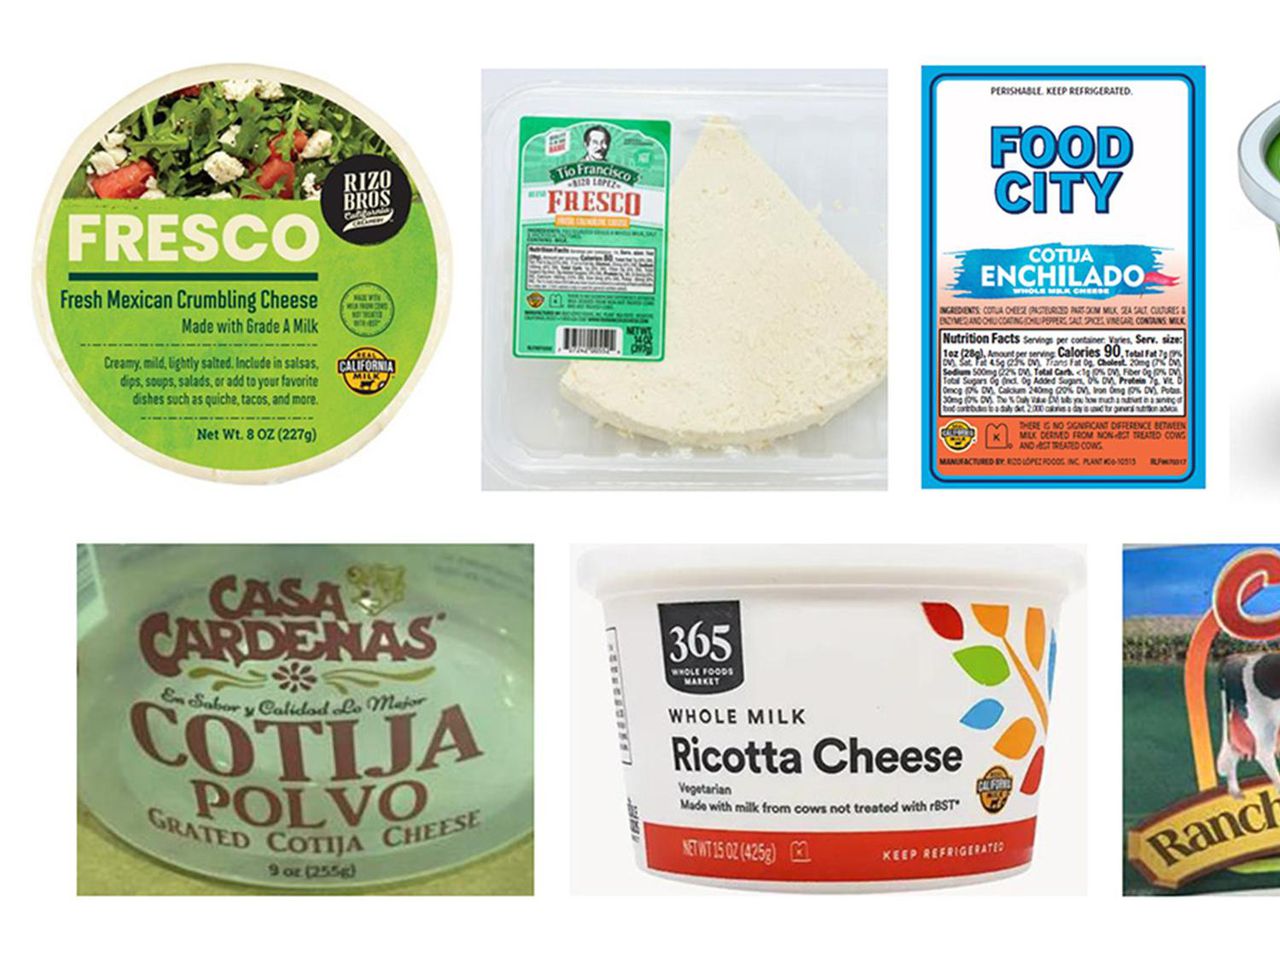 A dangerous outbreak of listeria that lasted for ten years has been connected to cotija and queso fresco products from a business in California.